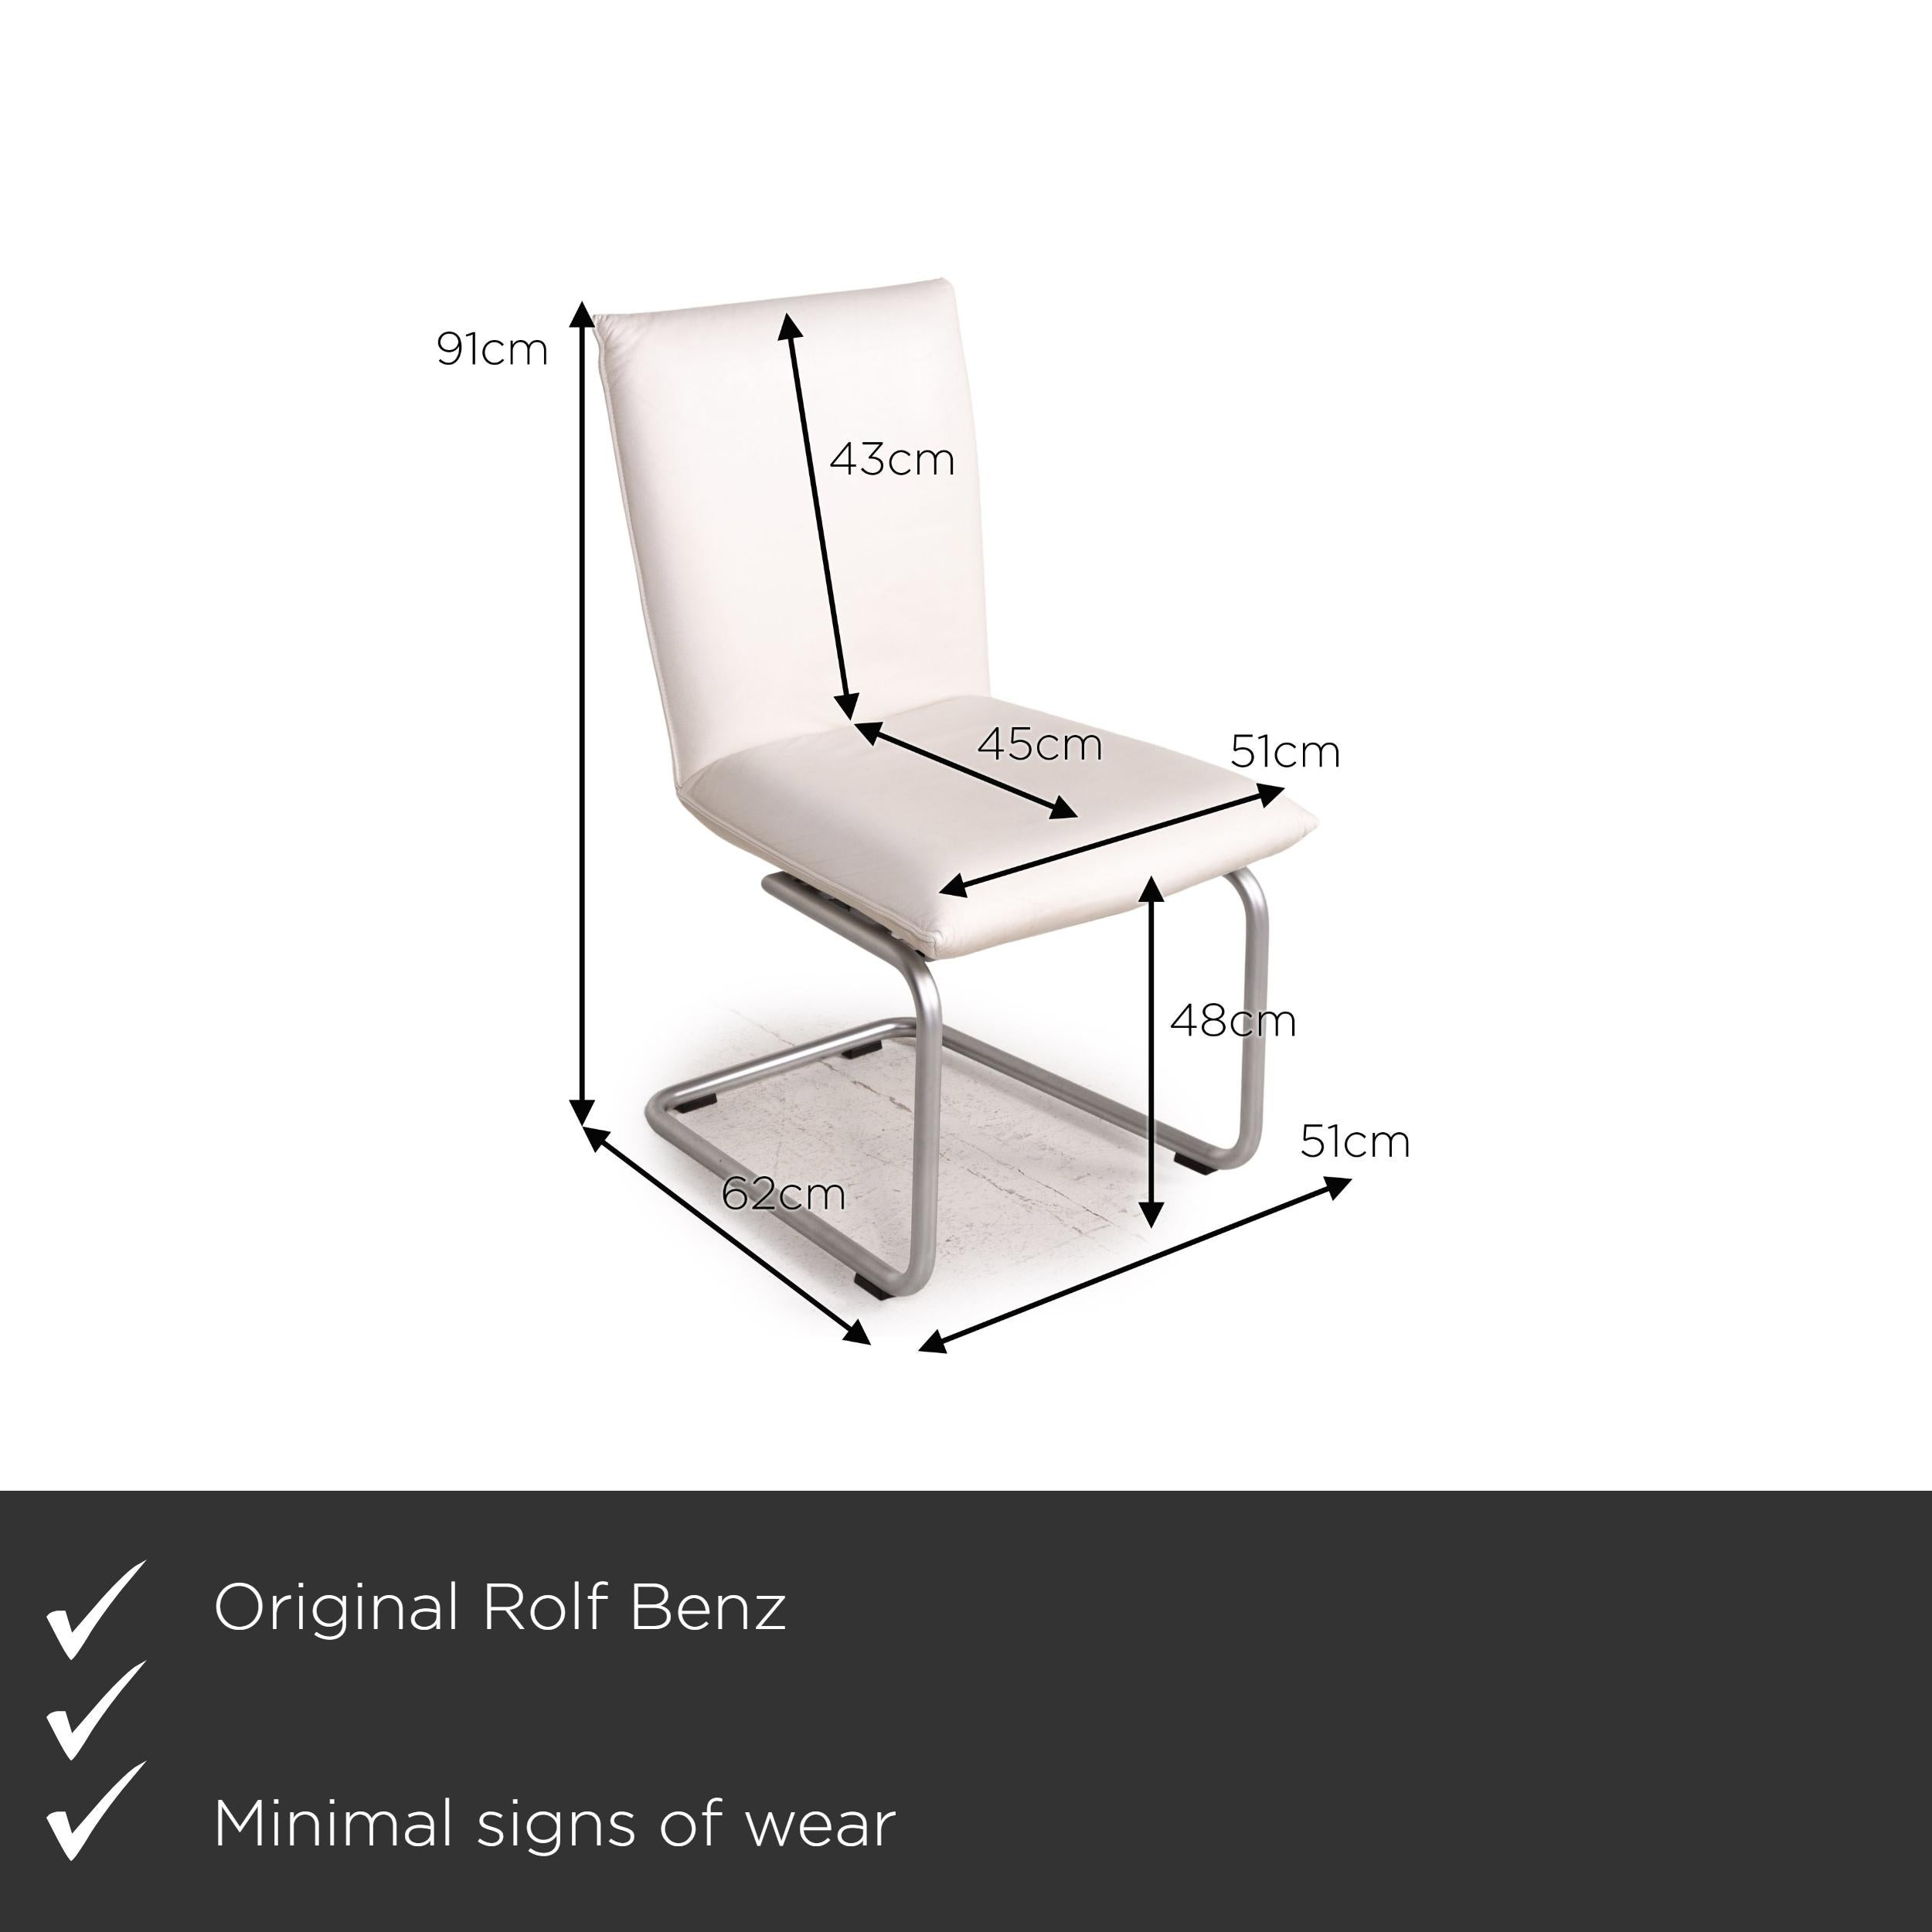 We present to you a Rolf Benz 620 leather chair cream cantilever.

 

 Product measurements in centimeters:
 

 Depth 62
 Width 51
 Height 91
 Seat height 48 
 Seat depth 45
 Seat width 51
 Back height 43.
  